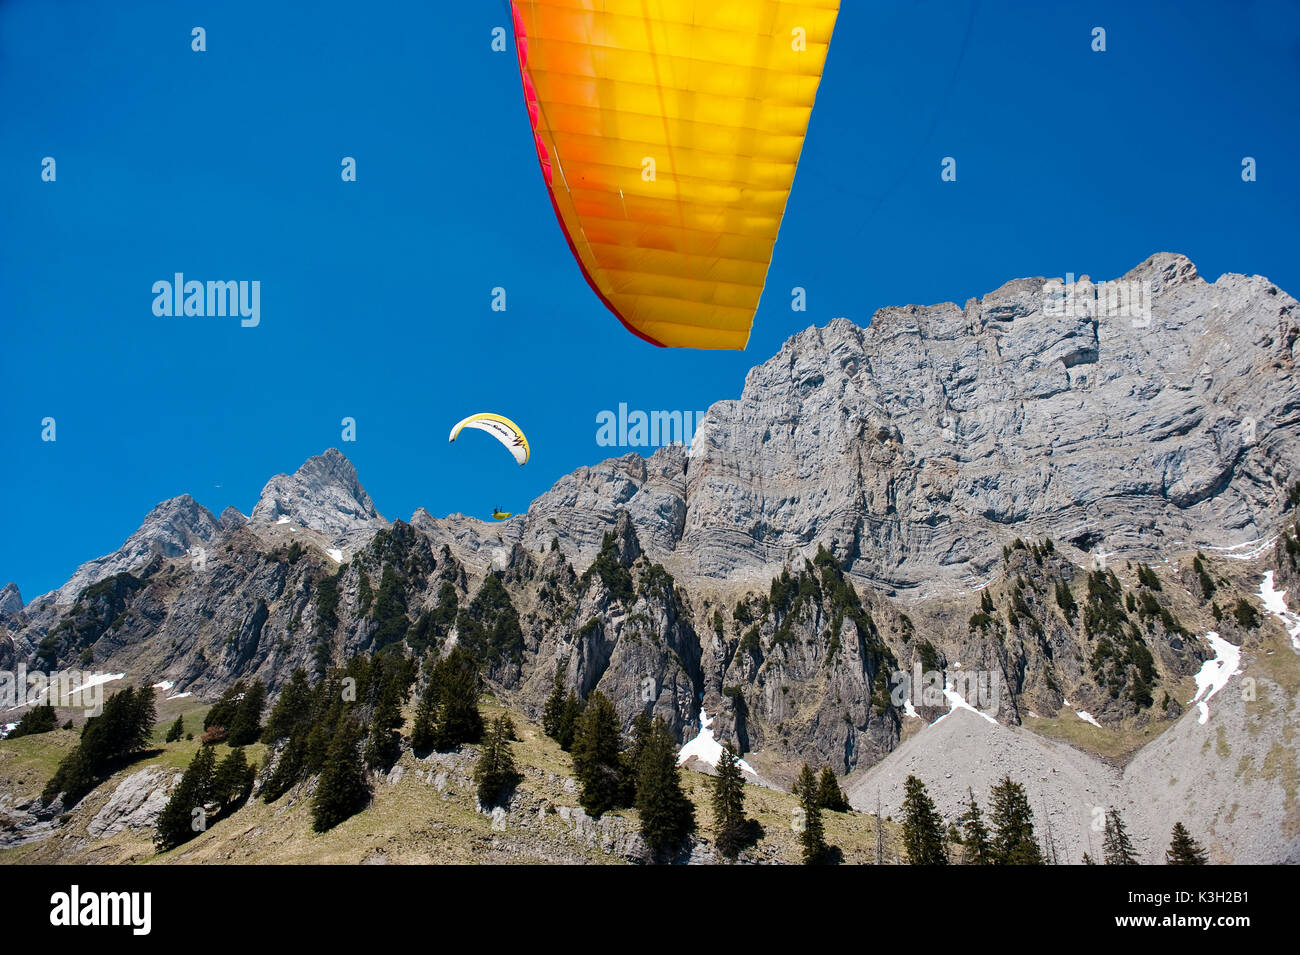 Paraglider in front of Chur ridges, Walensee, aerial picture, canton St. Gallen, Switzerland Stock Photo